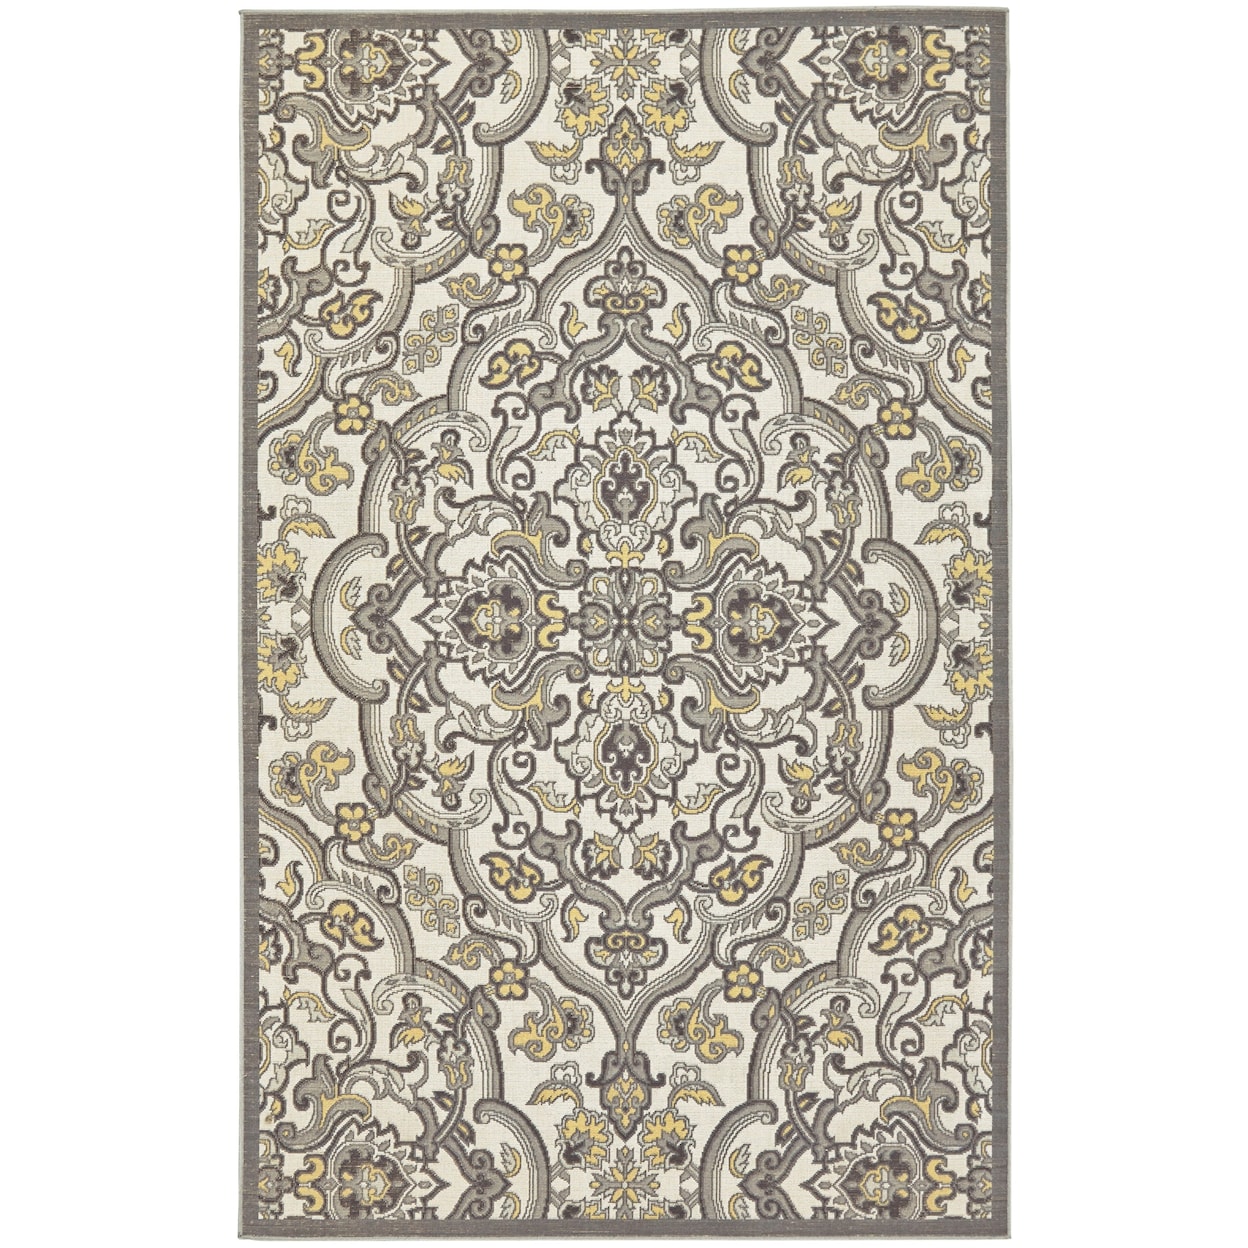 Feizy Rugs Thatcher Citron 5' x 8' Area Rug